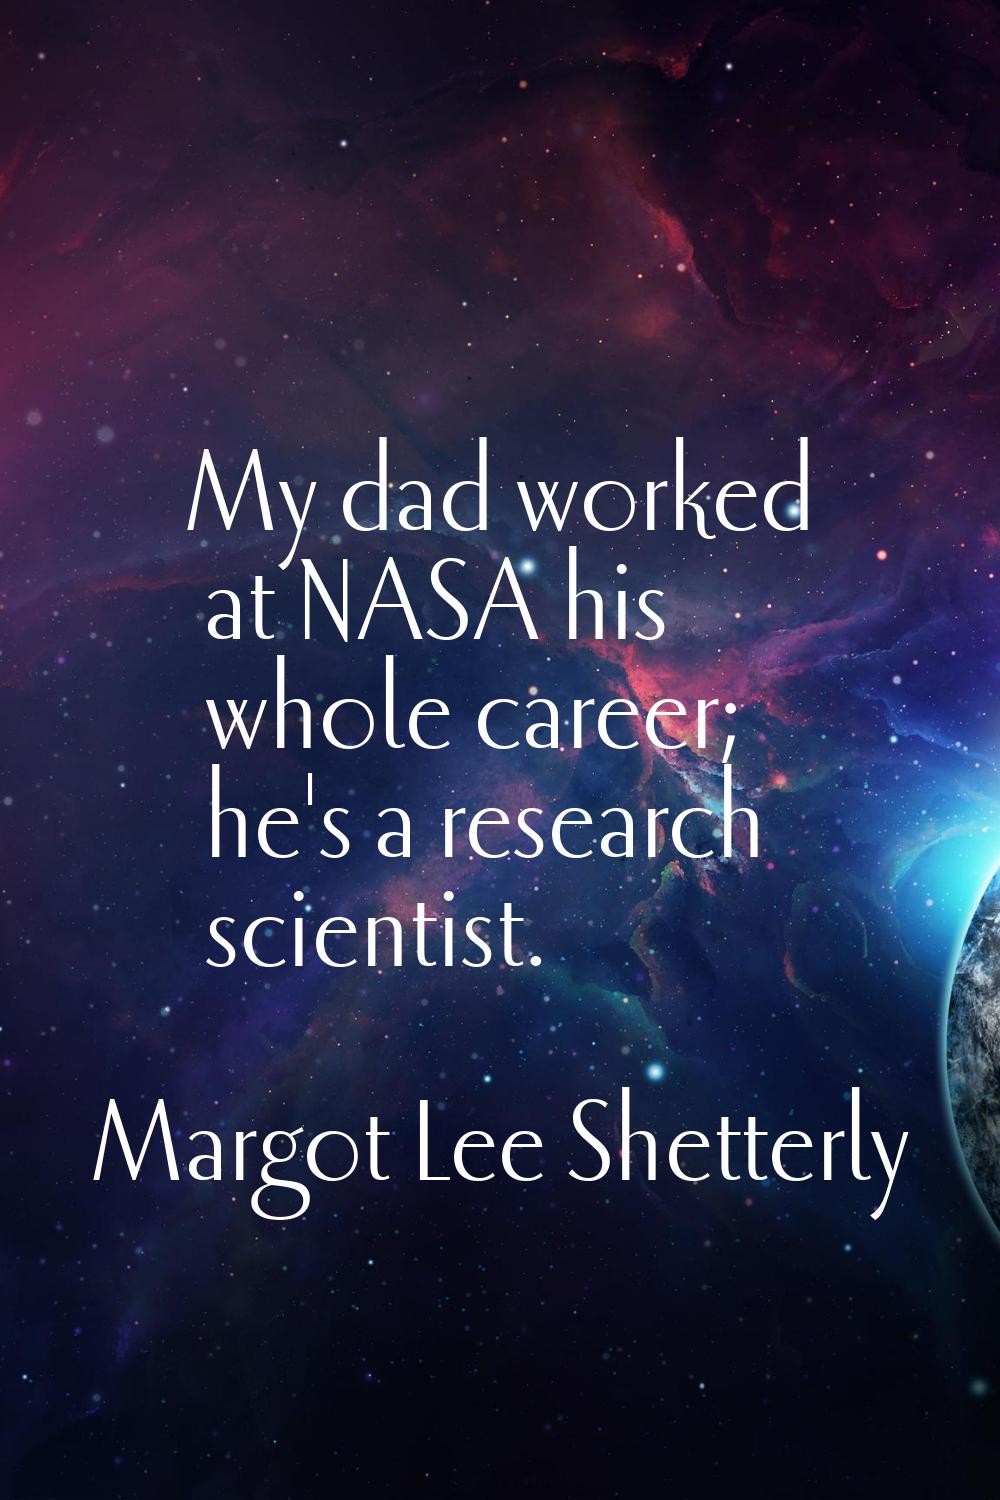 My dad worked at NASA his whole career; he's a research scientist.